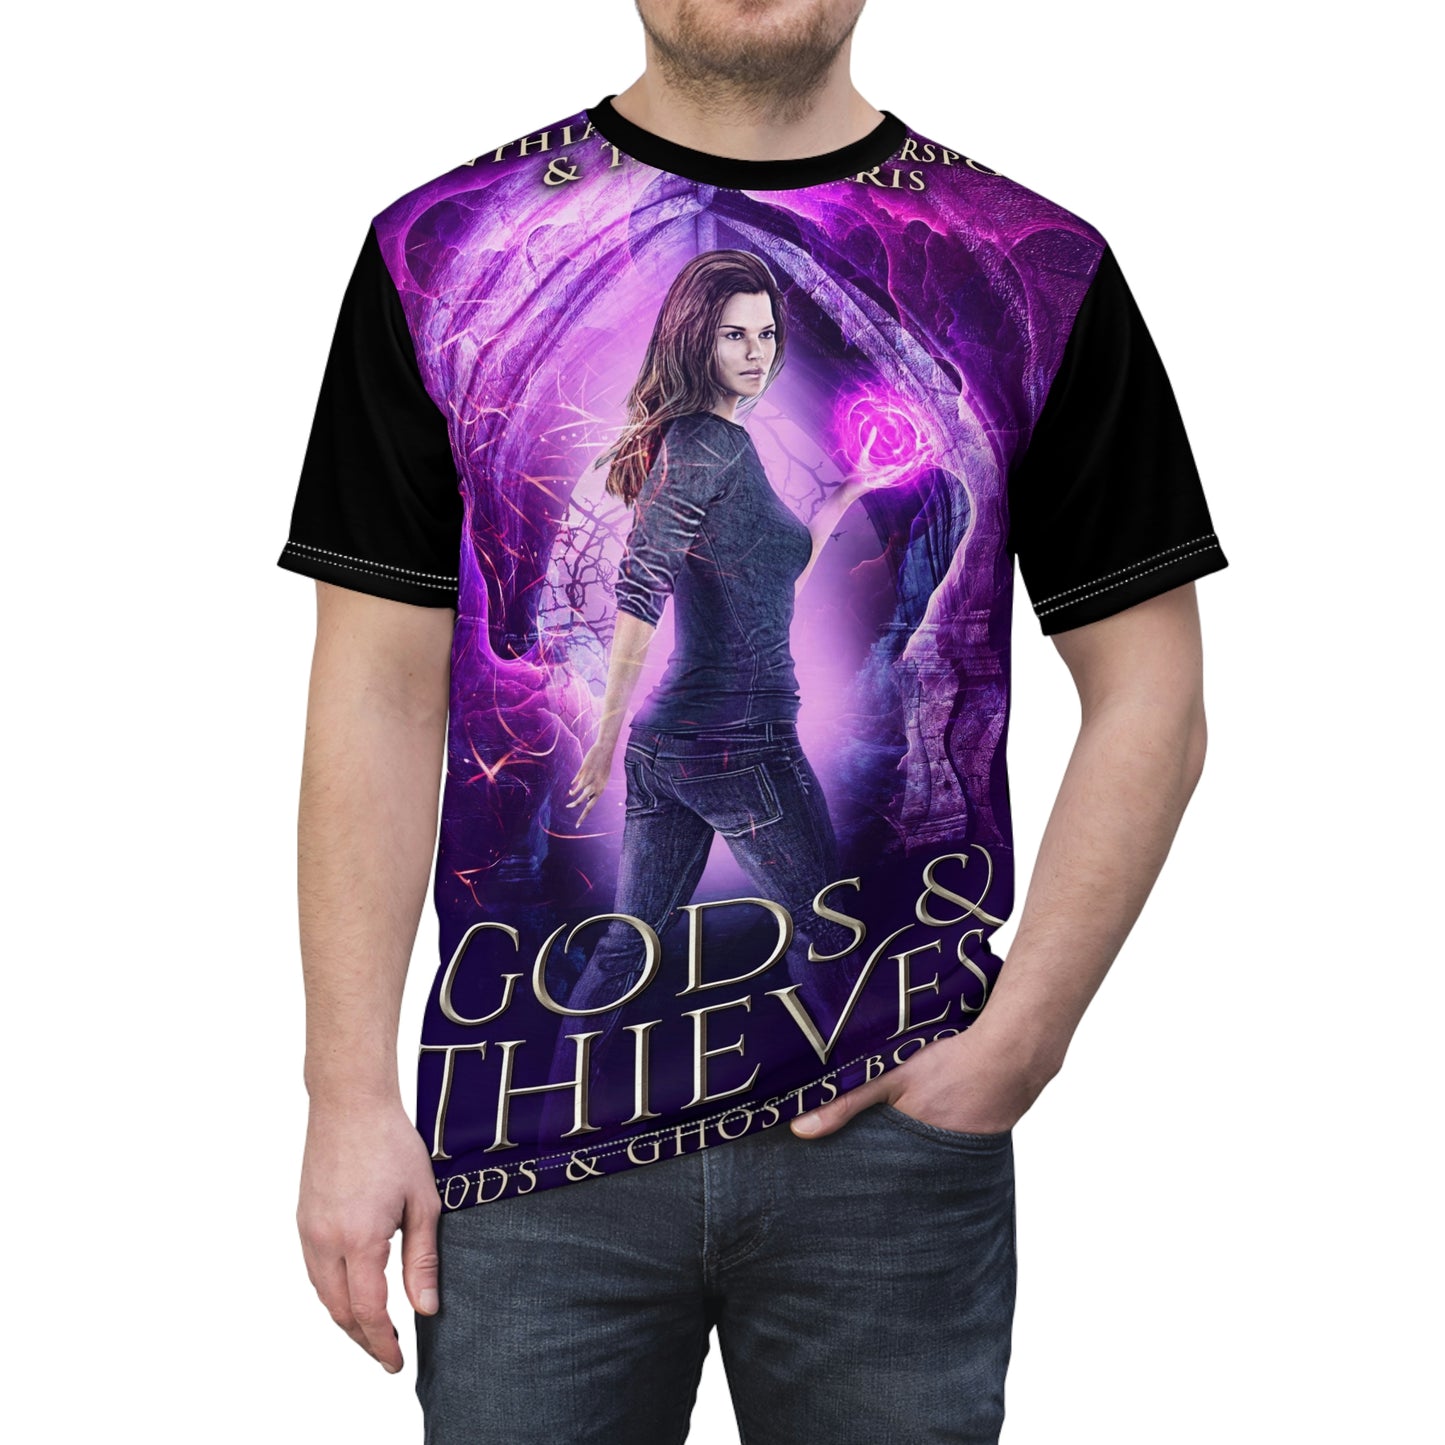 Gods & Thieves - Unisex All-Over Print Cut & Sew T-Shirt